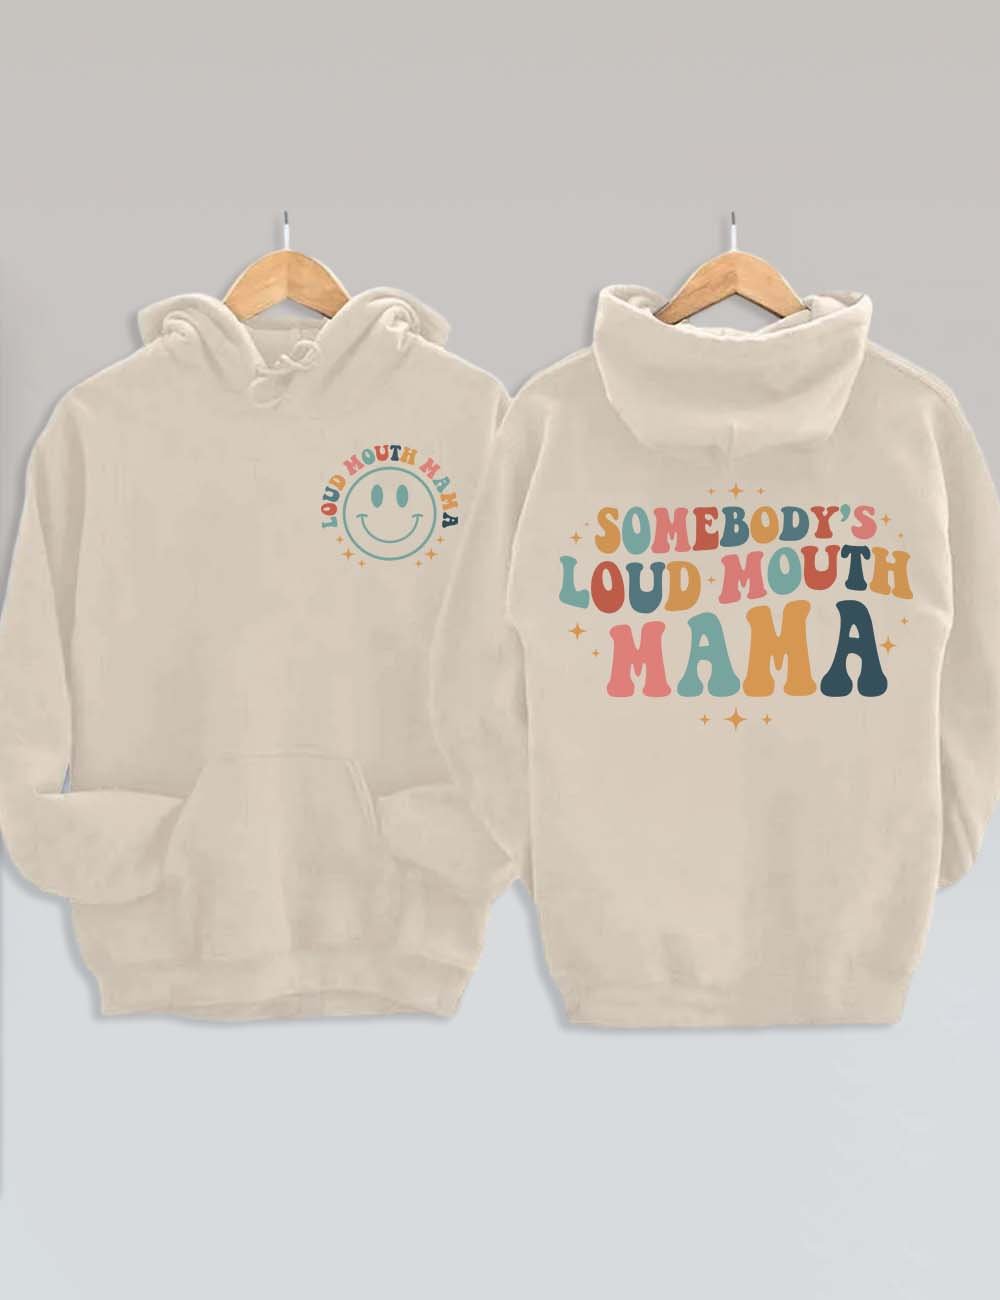 Somebody's Loud Mouth Mama Hoodie